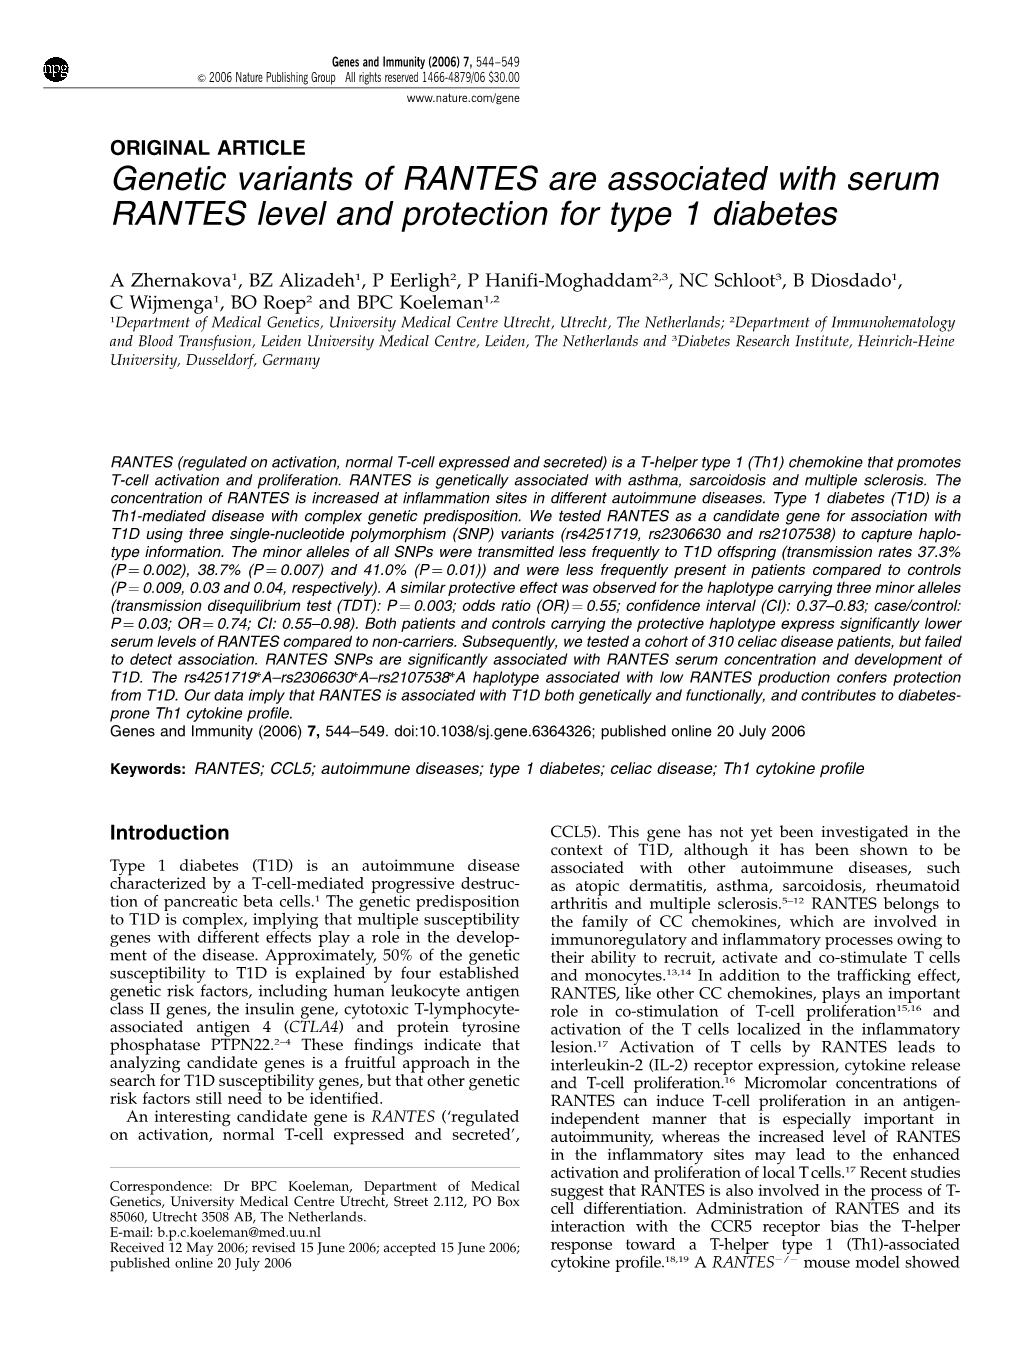 Genetic Variants of RANTES Are Associated with Serum RANTES Level and Protection for Type 1 Diabetes